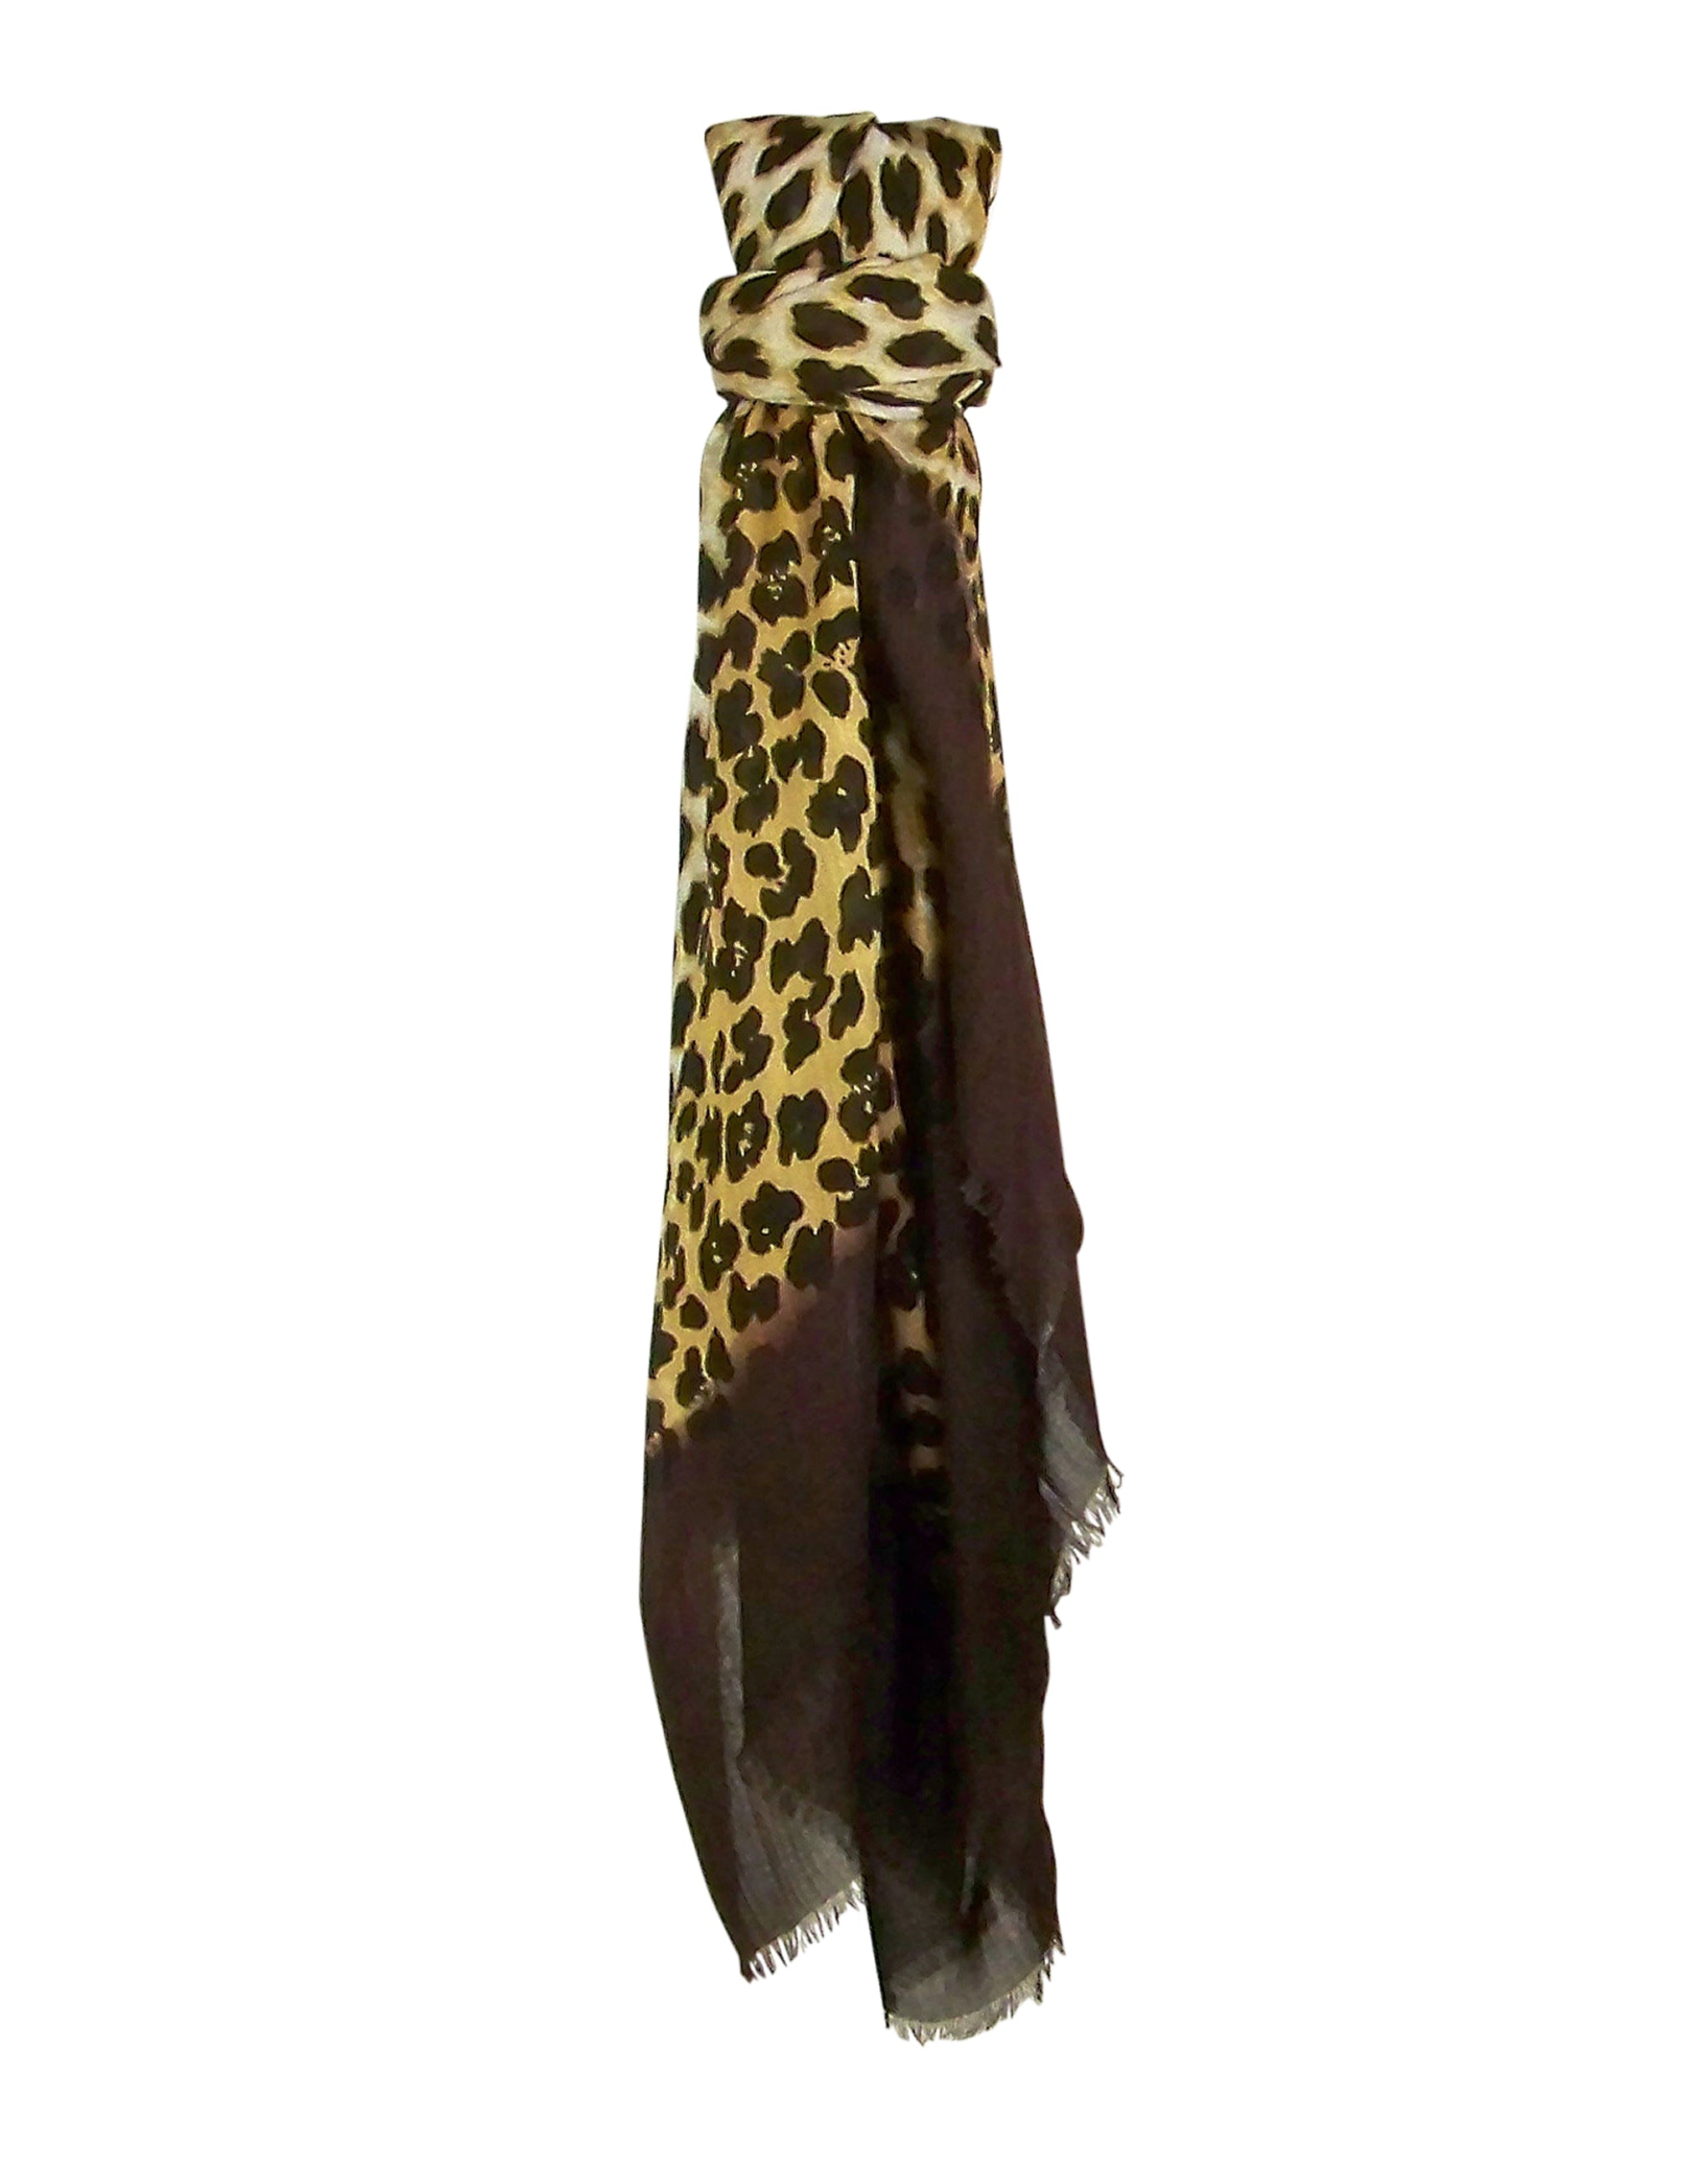 Knotted Hang Blue Pacific Animal Print Dip Cashmere and Silk Scarf in Dark Coffee Brown and Tan